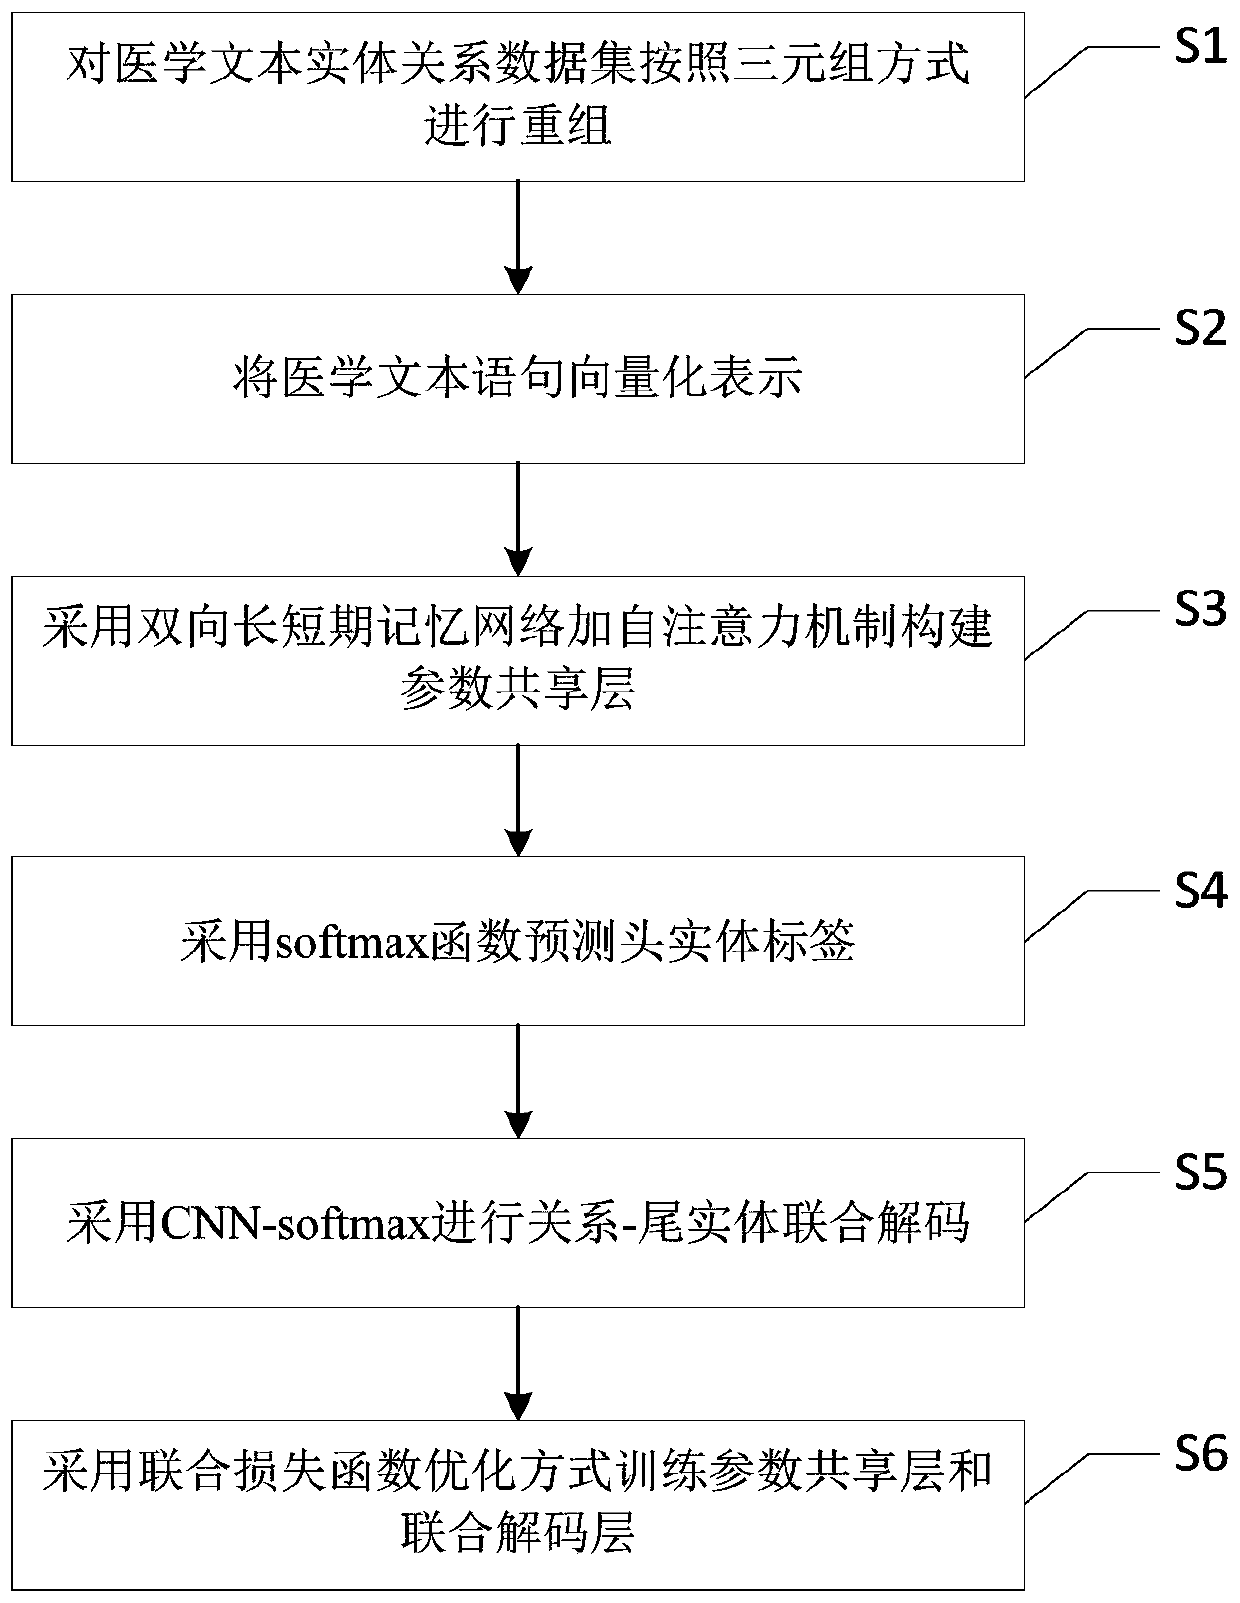 Medical text-oriented entity relationship joint extraction method